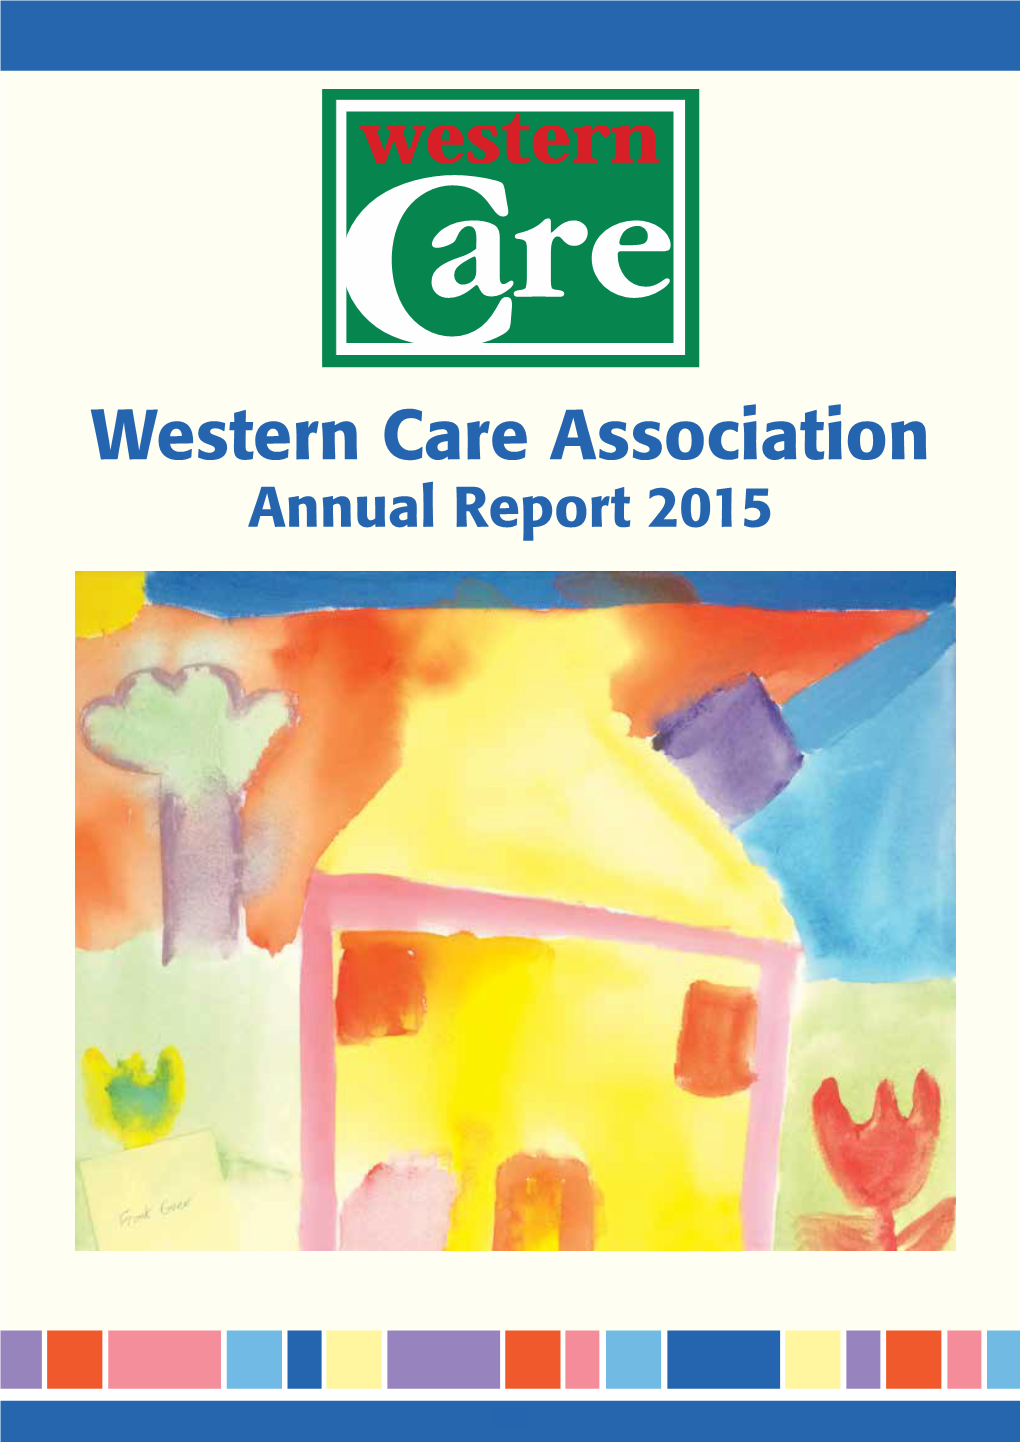 Western Care Association Annual Report 2015